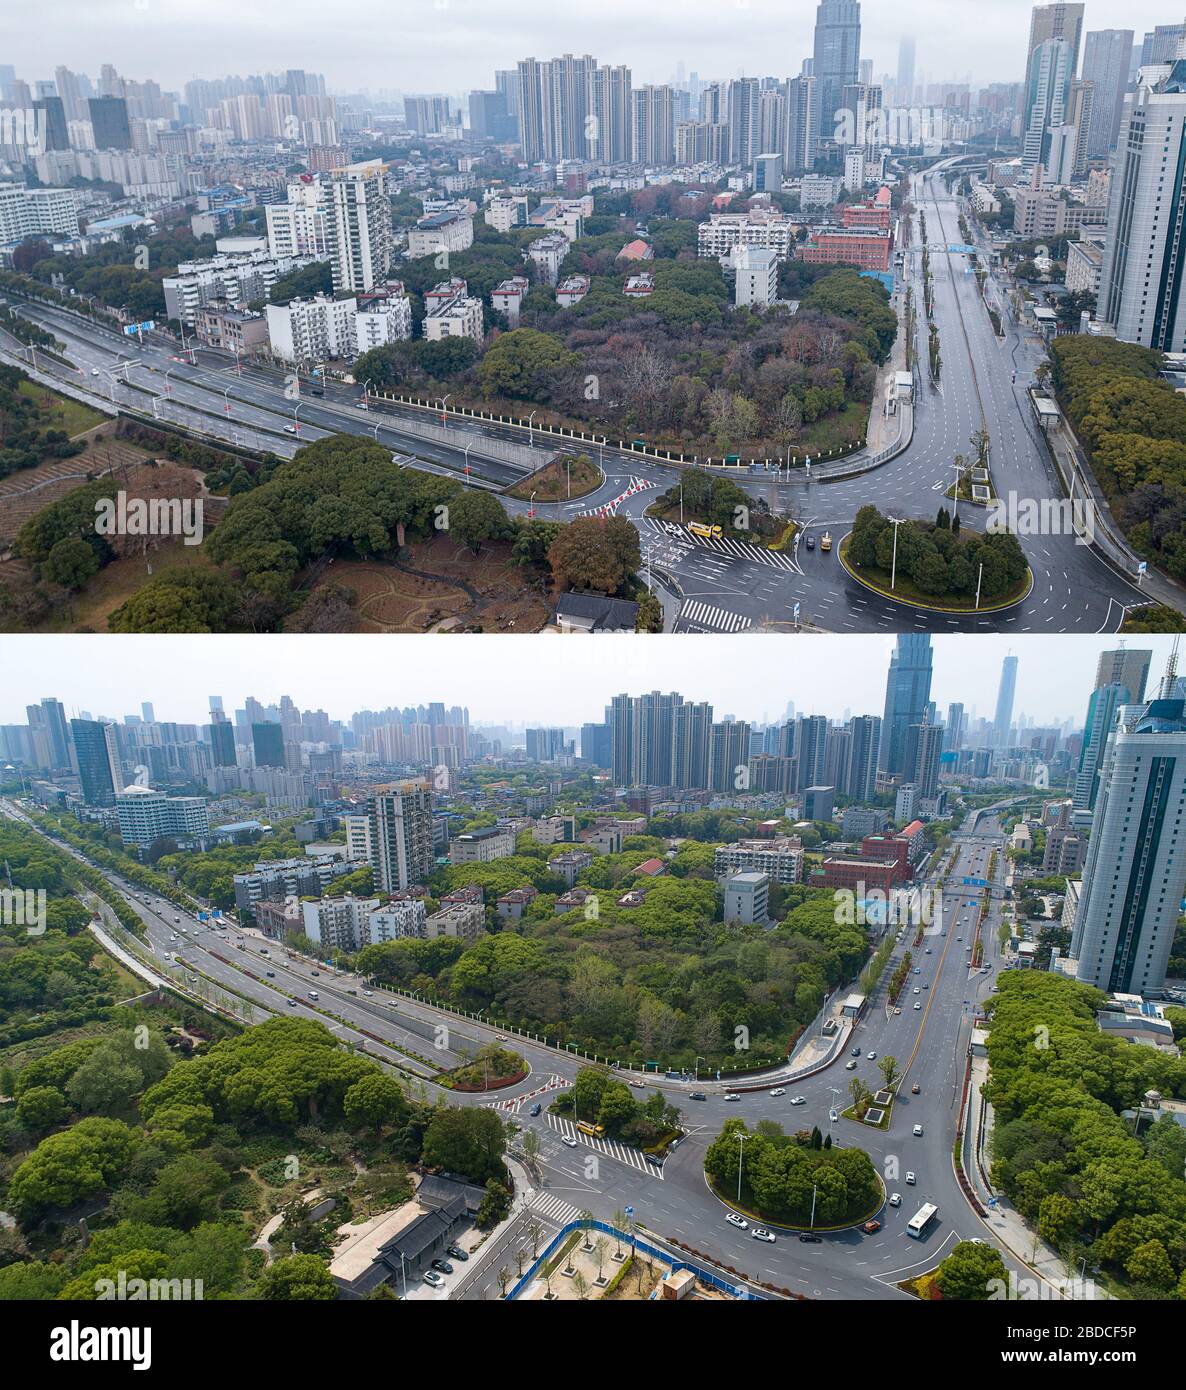 (200408) -- WUHAN, April 8, 2020 (Xinhua) -- Combo aerial photo shows the Xudong Street in Wuhan, central China's Hubei Province on Jan. 26, 2020 (upper) and on April 8, 2020.  With long lines of cars streaming through expressway tollgates and masked passengers boarding trains, the megacity of Wuhan in central China lifted outbound travel restrictions on Wednesday after almost 11 weeks of lockdown imposed to stem the COVID-19 outbreak (Xinhua/Xiong Qi) Stock Photo